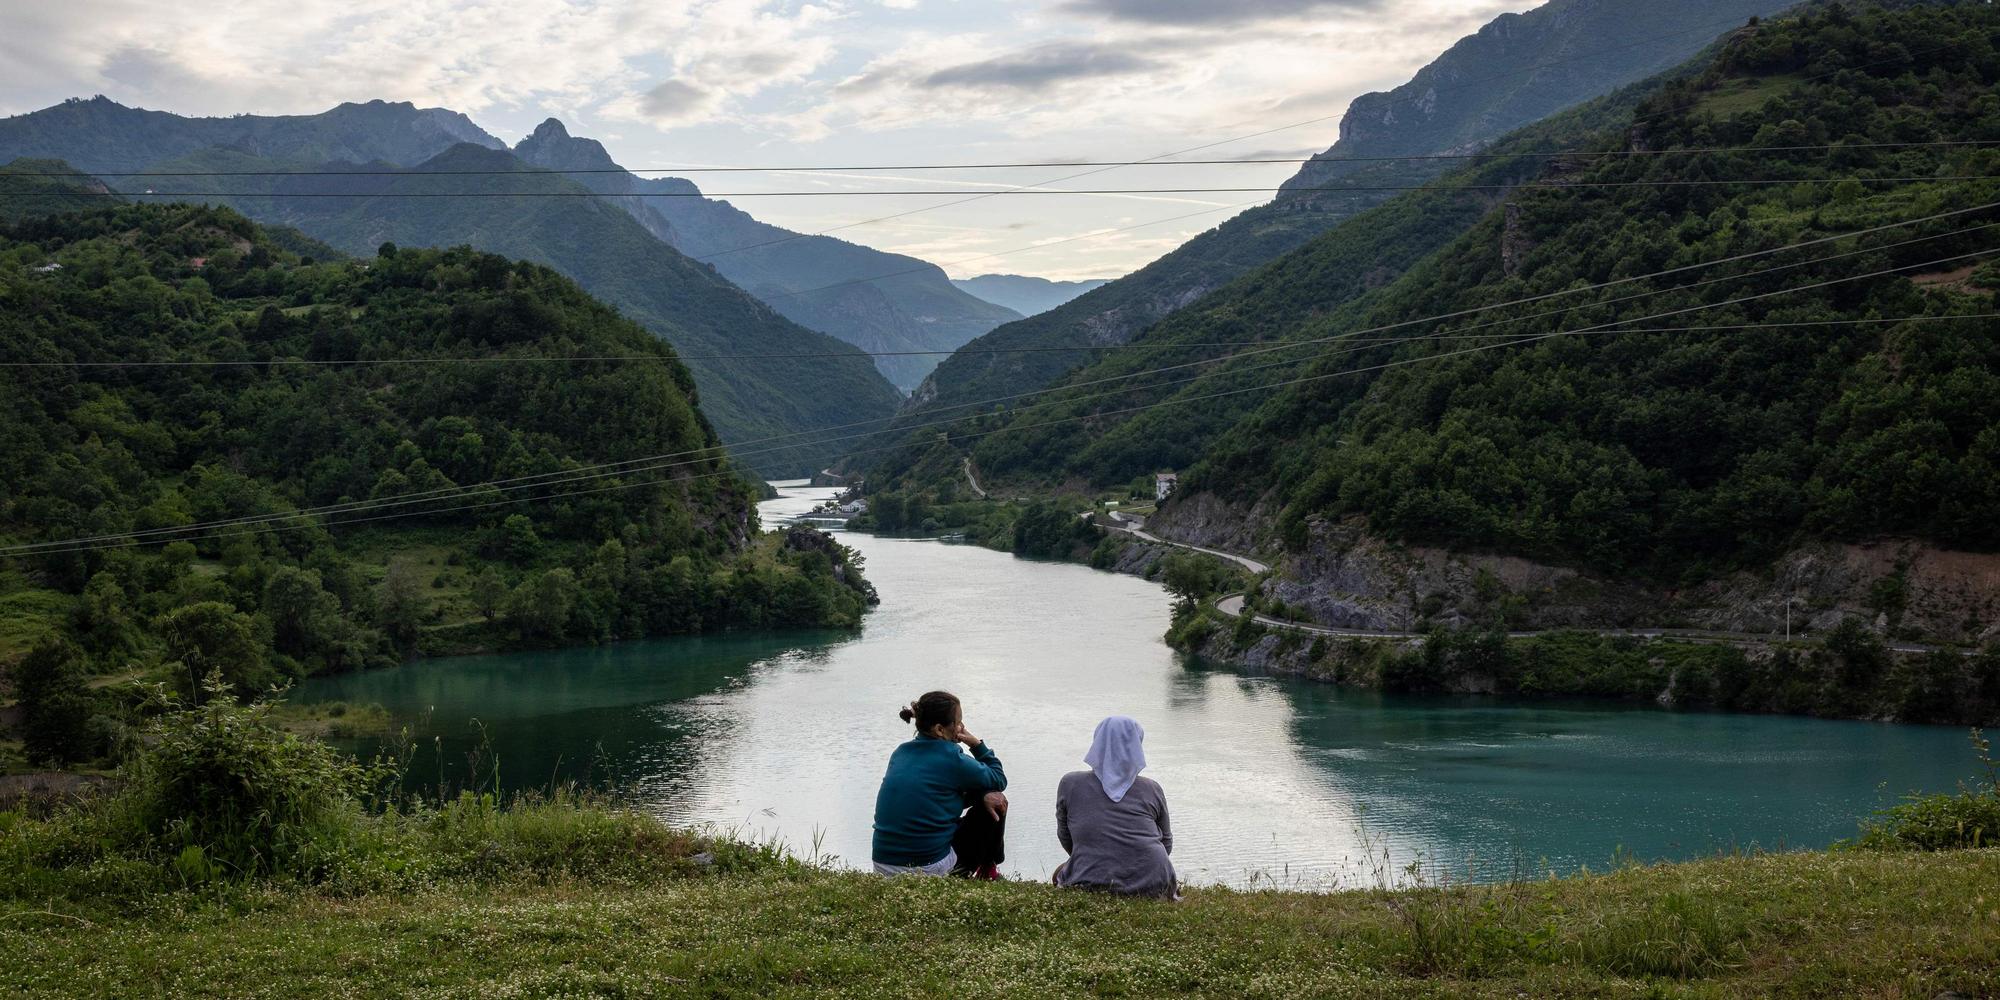 Two women sit on a meadow and look down at the river.